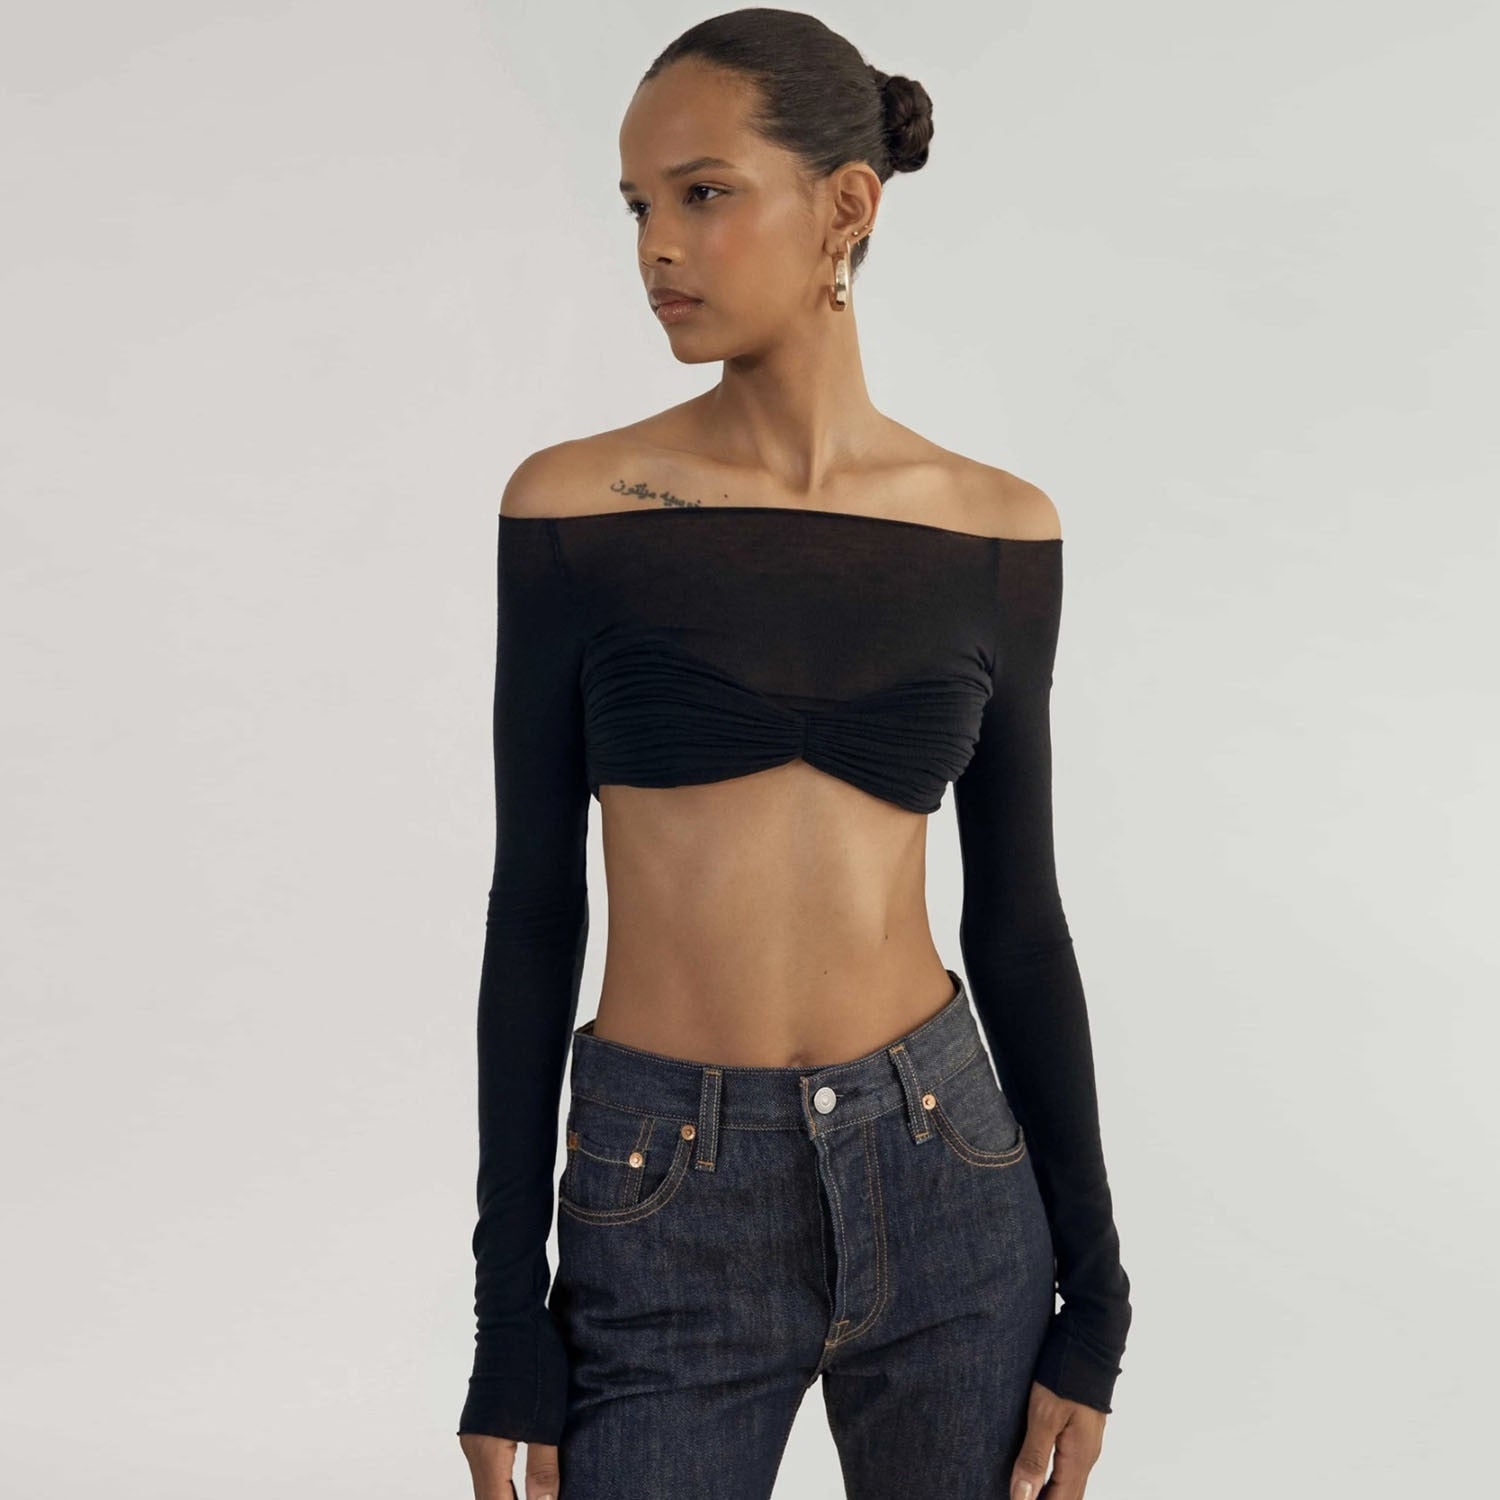 Women's See-Through Mesh Crop Top Off Shoulder Short Knit Cropped Top